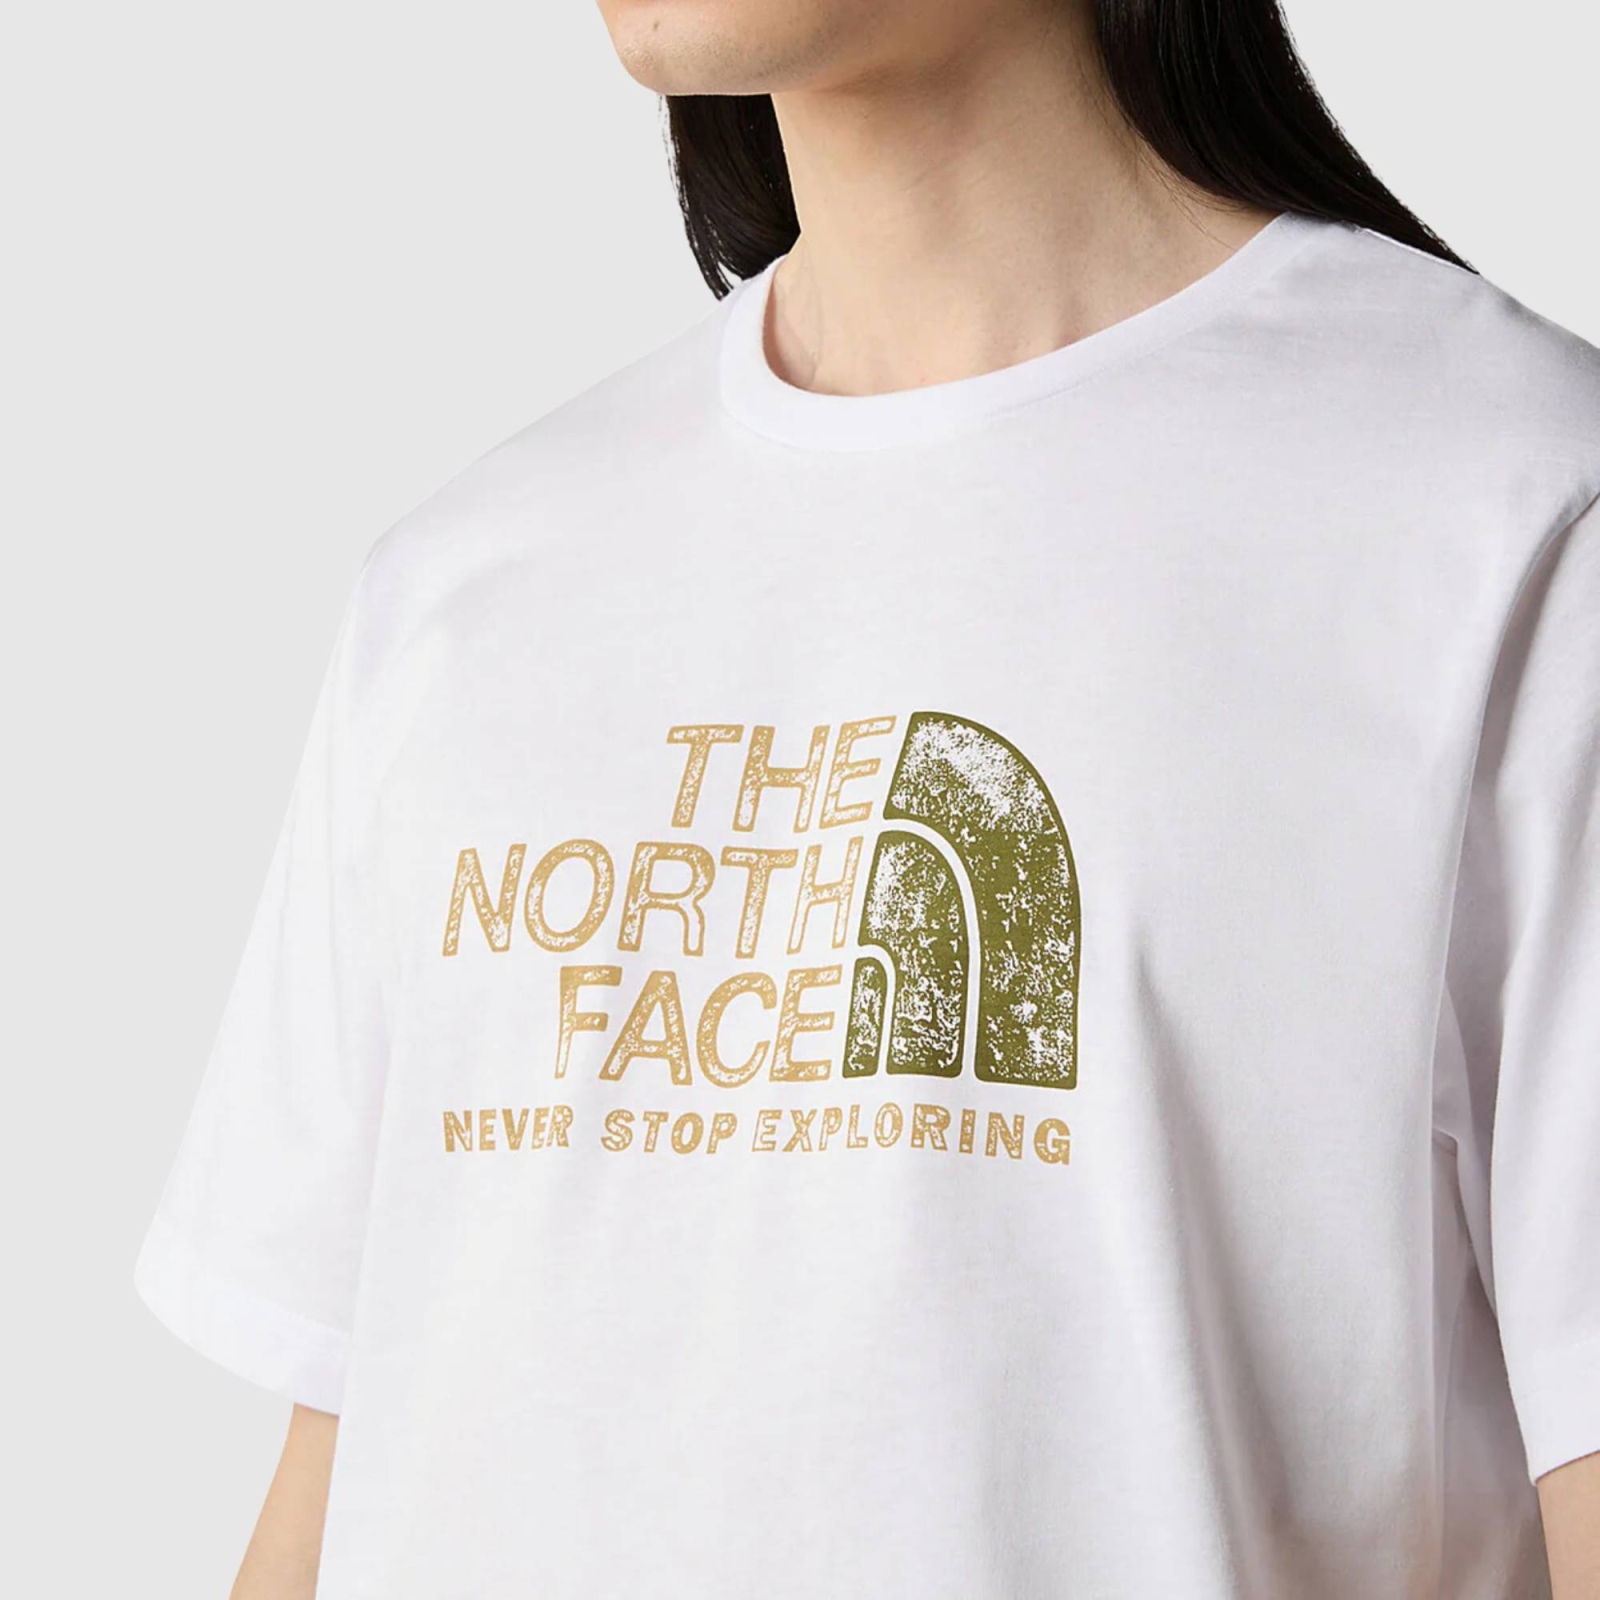 THE NORTH FACE MENS RUST 2 TEE